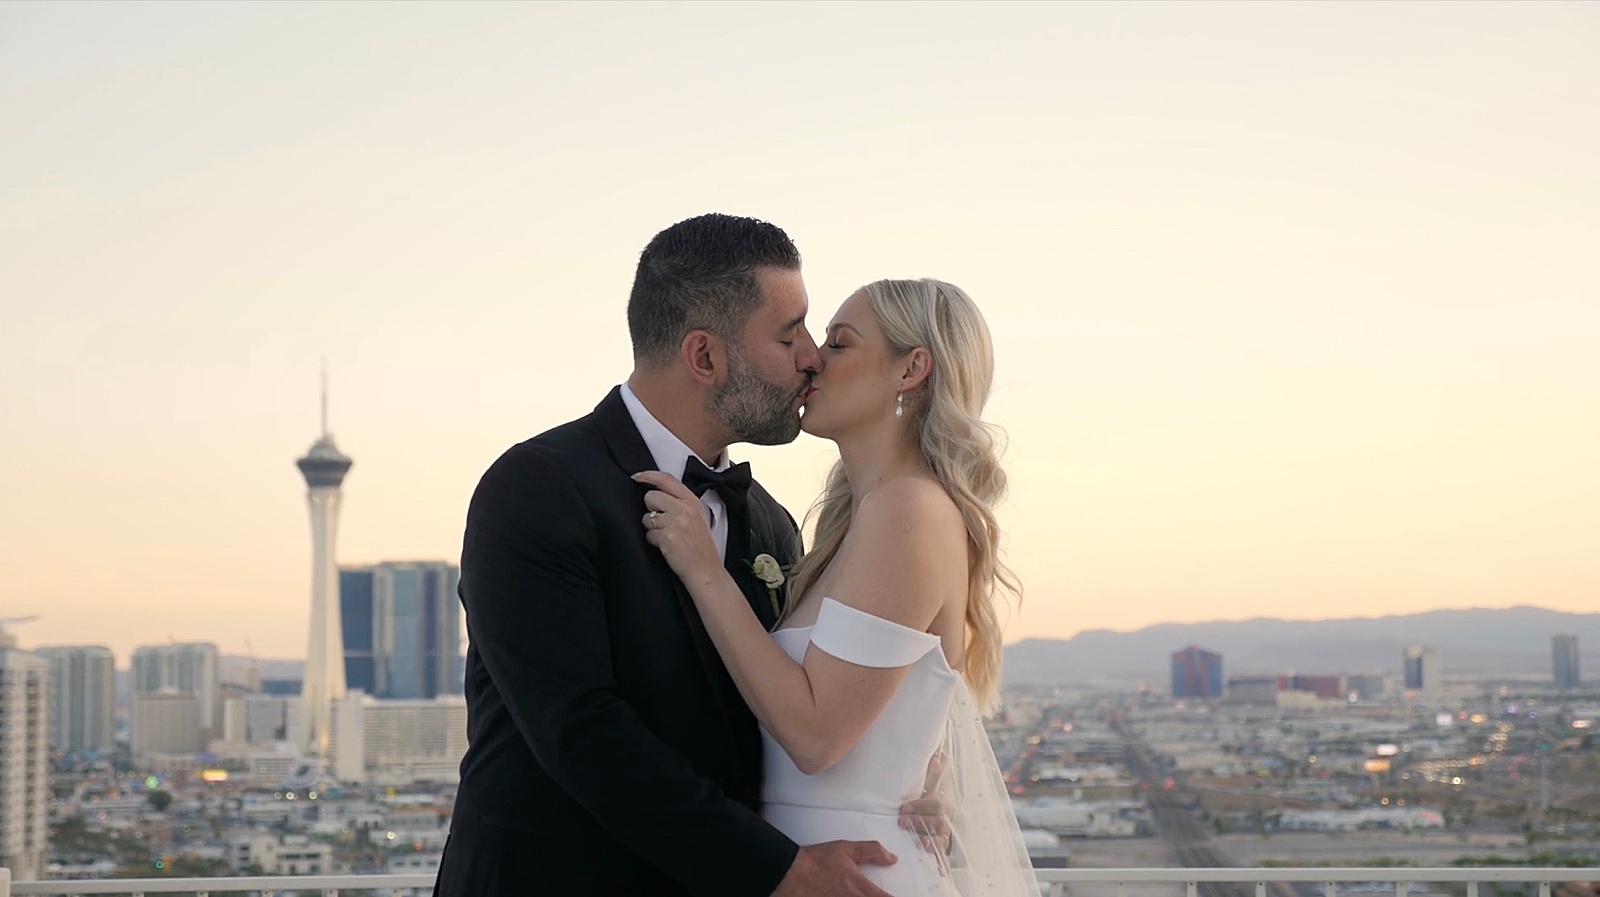 Bride and groom kiss on a rooftop during golden hour